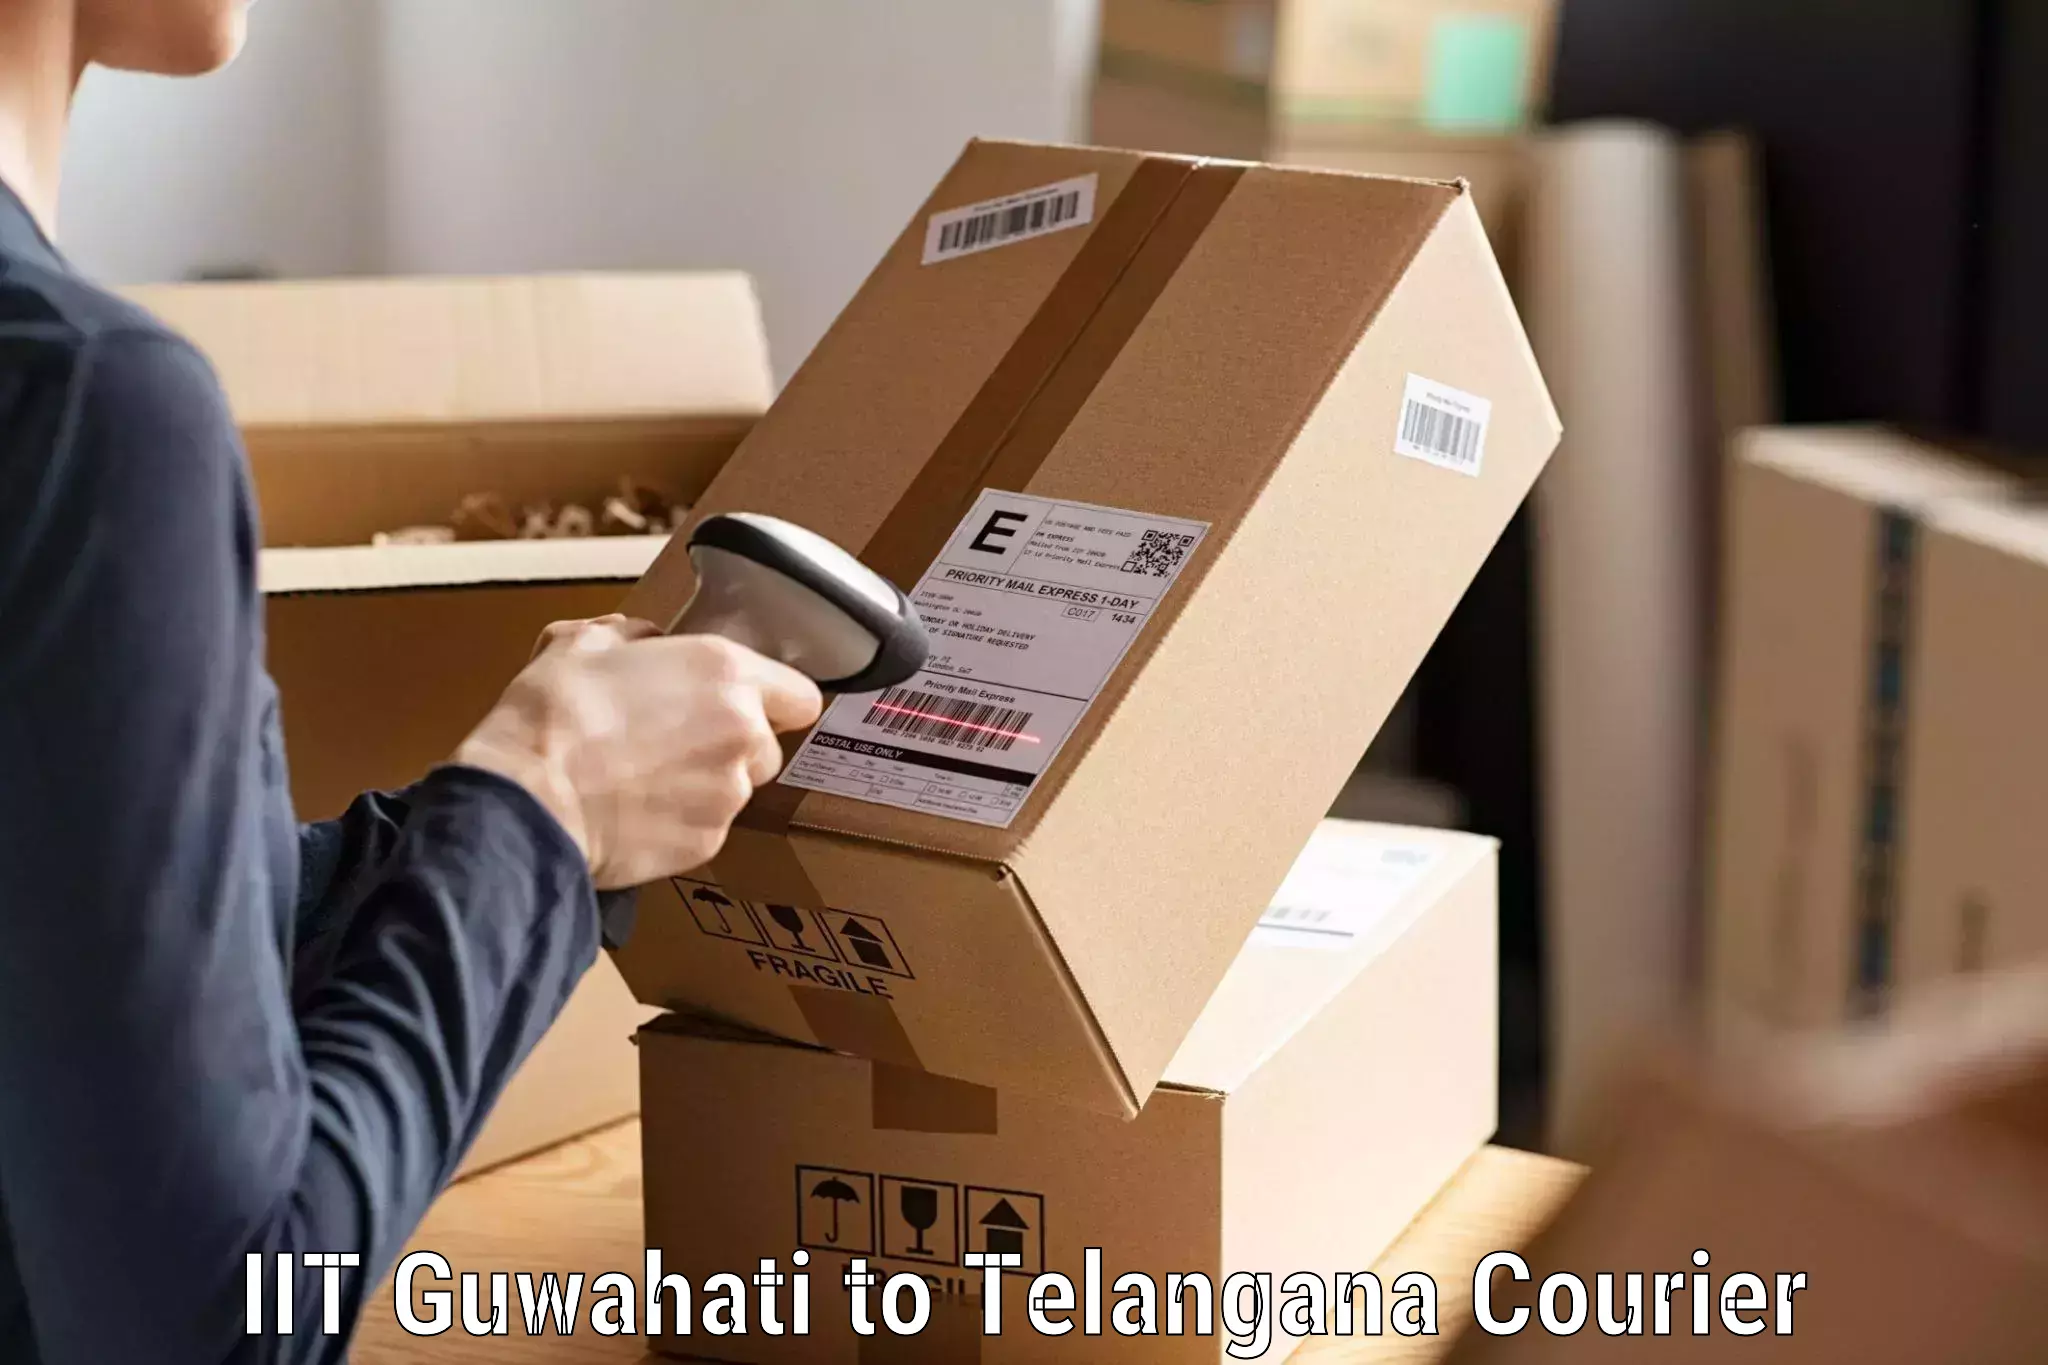 Professional courier services in IIT Guwahati to Achampet